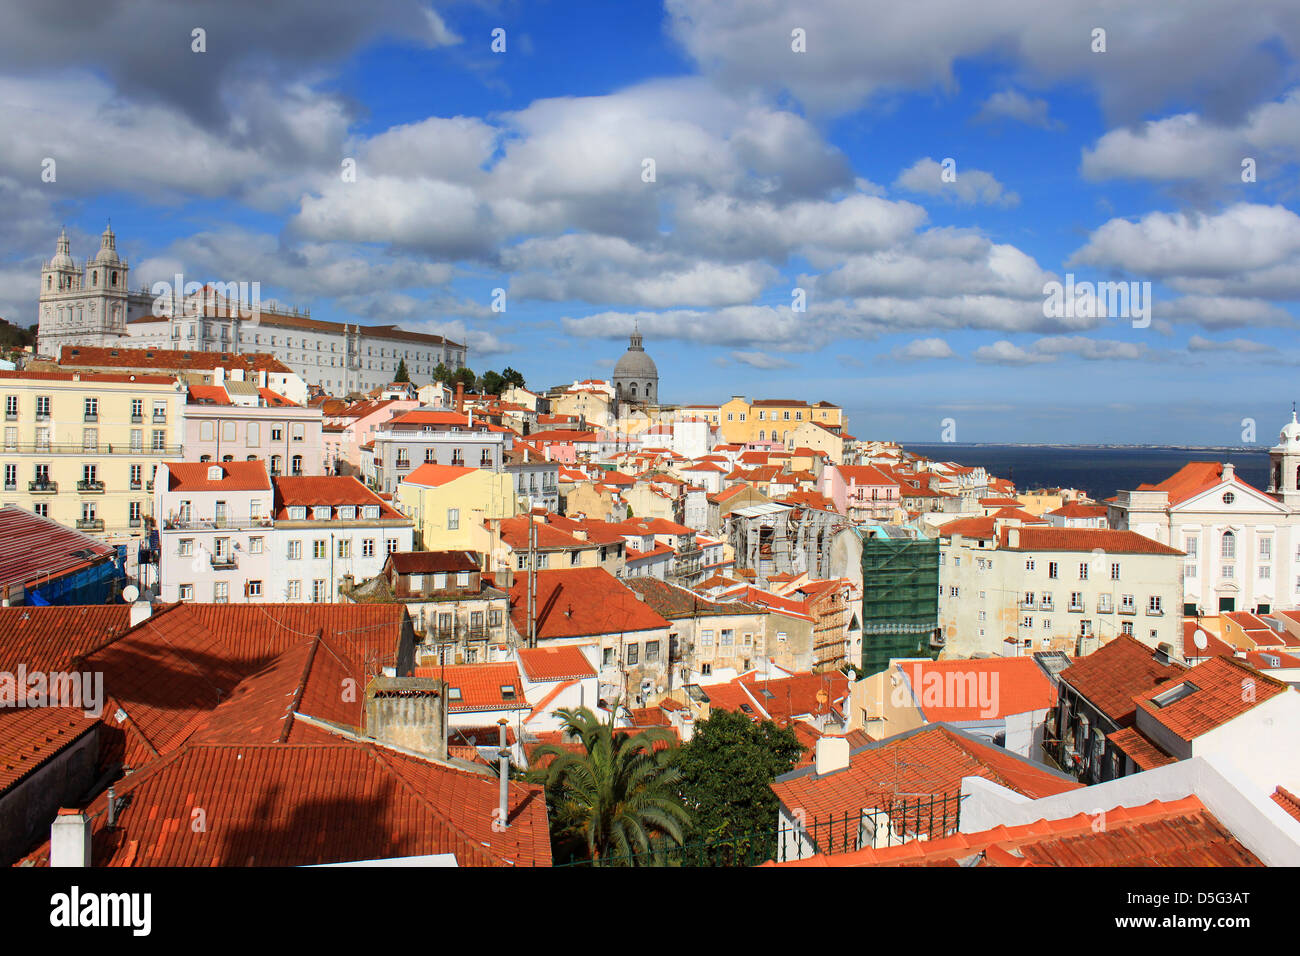 Colorful rooftops and houses in Alfama, Lisbon, Portugal under a scattered cloudy sky Stock Photo